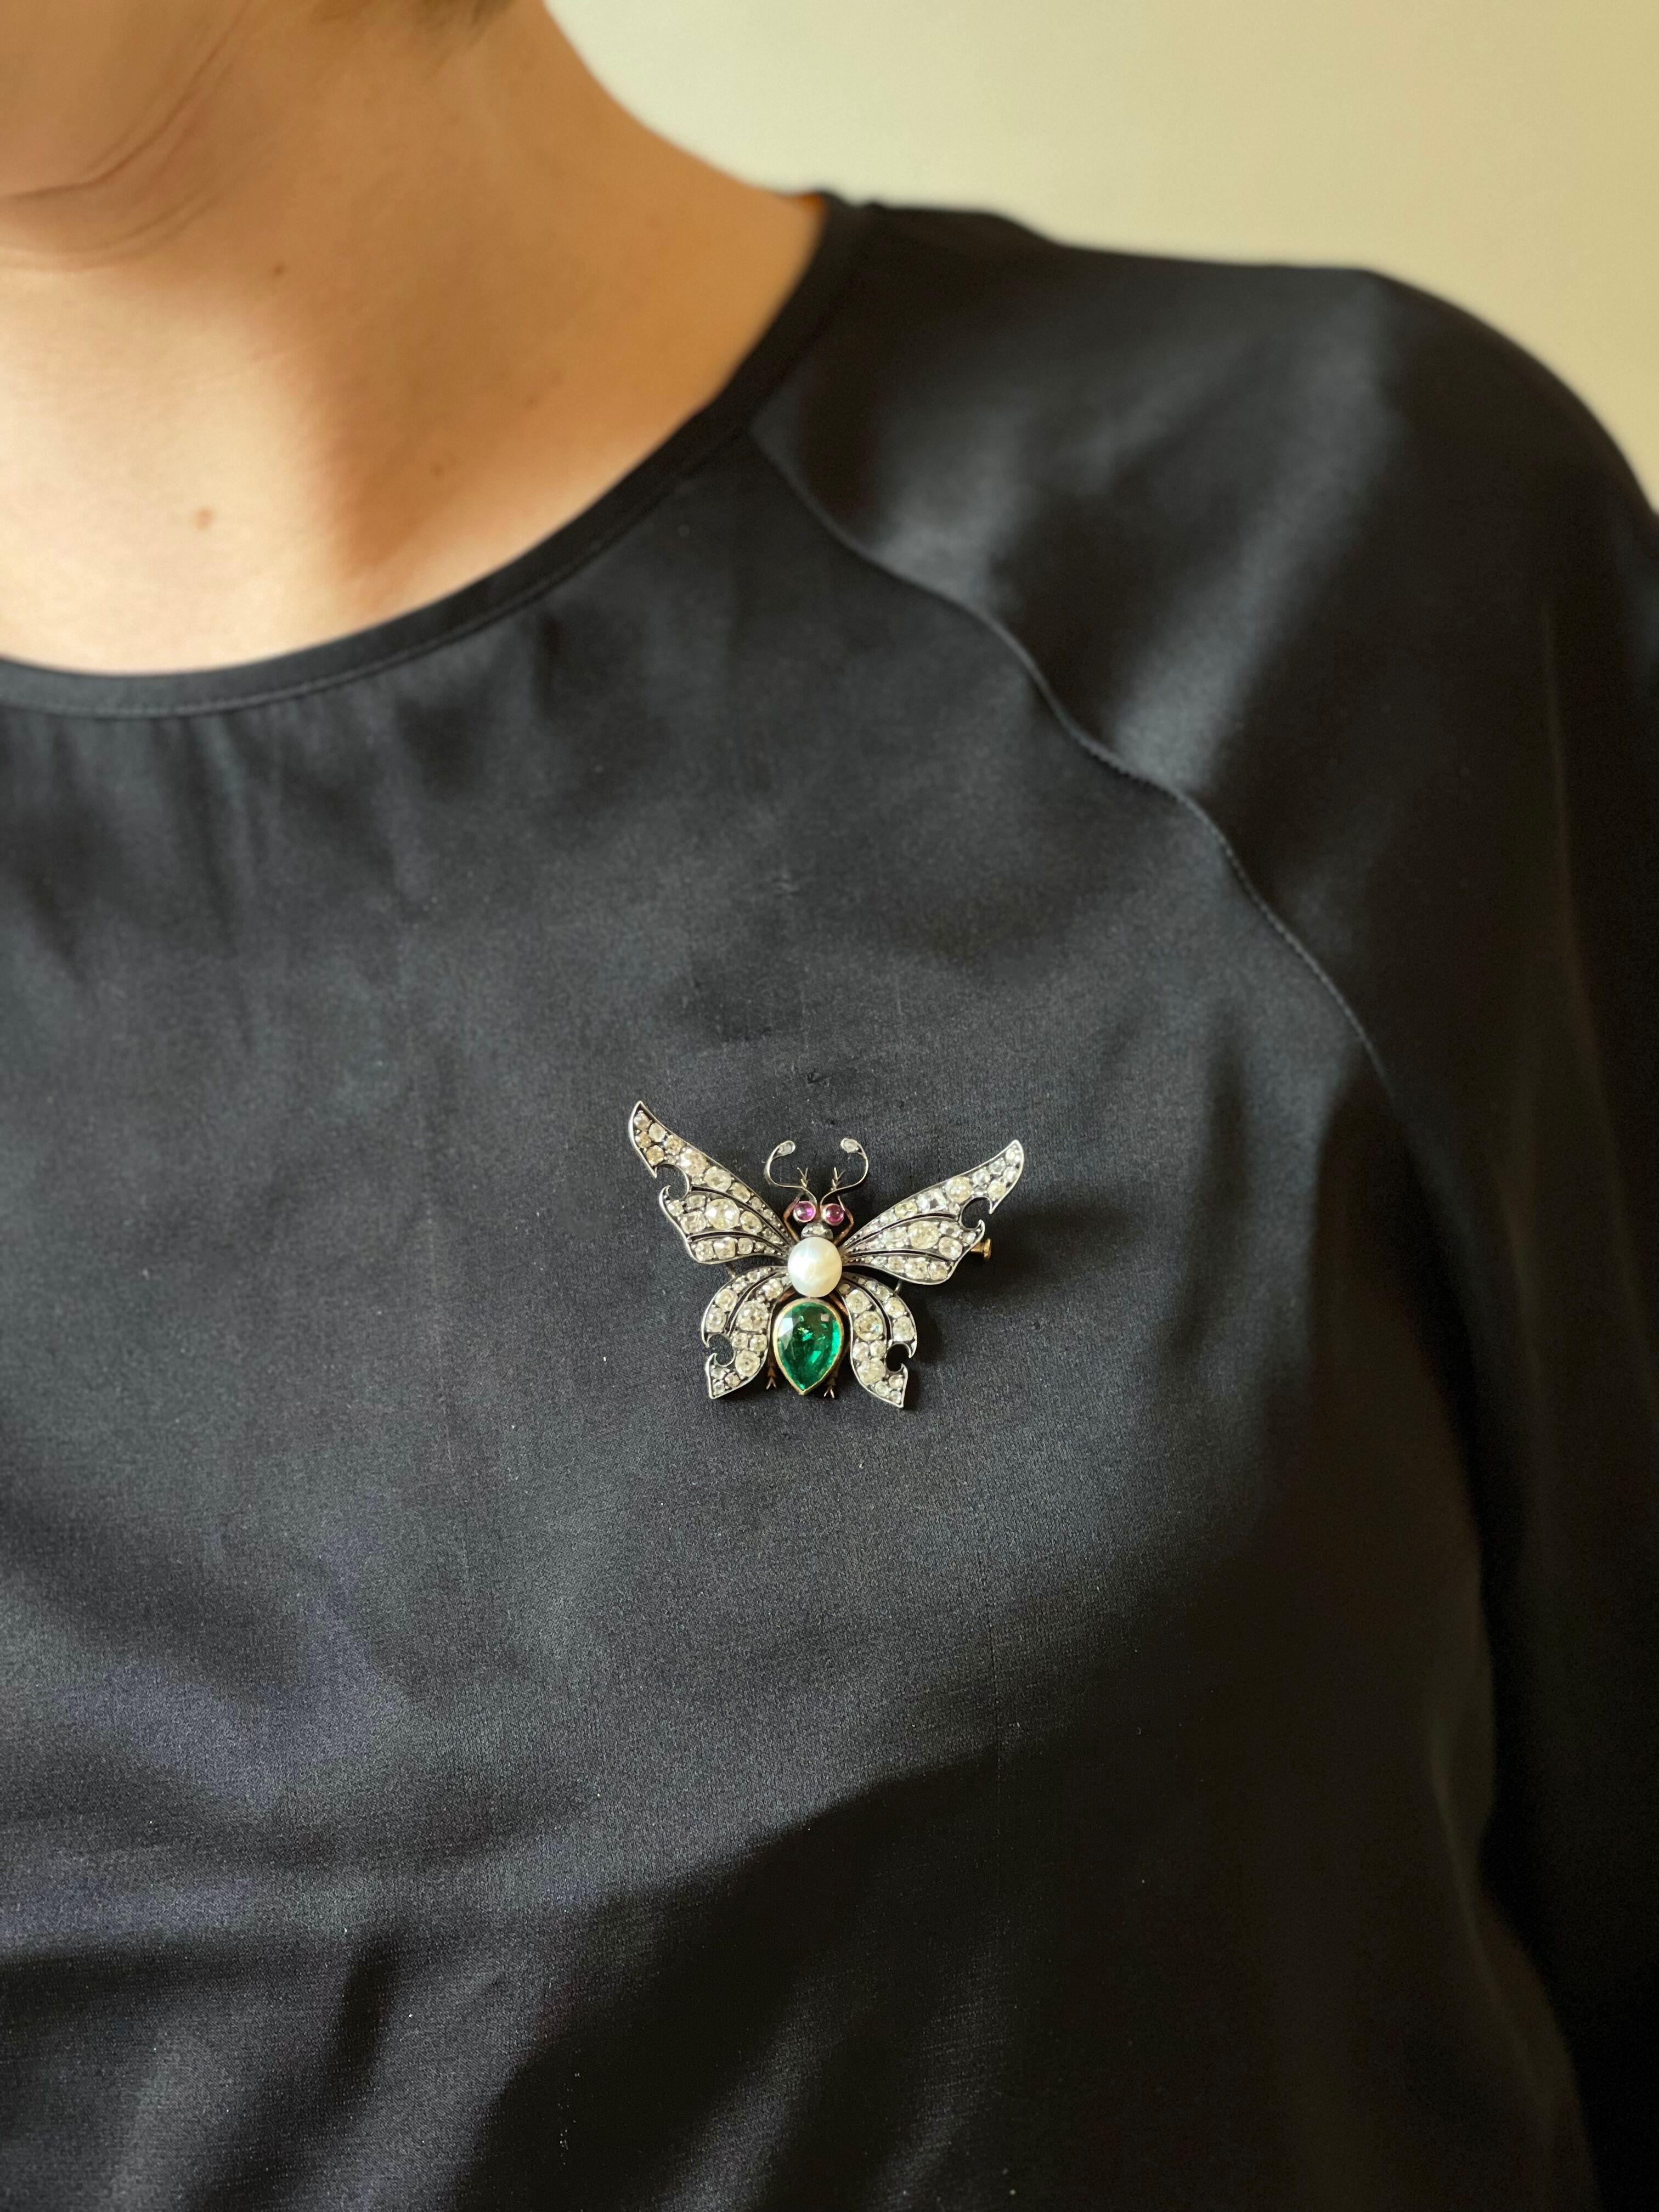 Antique 14k gold and silver top butterfly brooch, adorned with 6.8mm x 8mm pearl, pear shaped emerald, ruby eyes and approx. 2.20ctw in old mine cut diamonds. The brooch measures 2